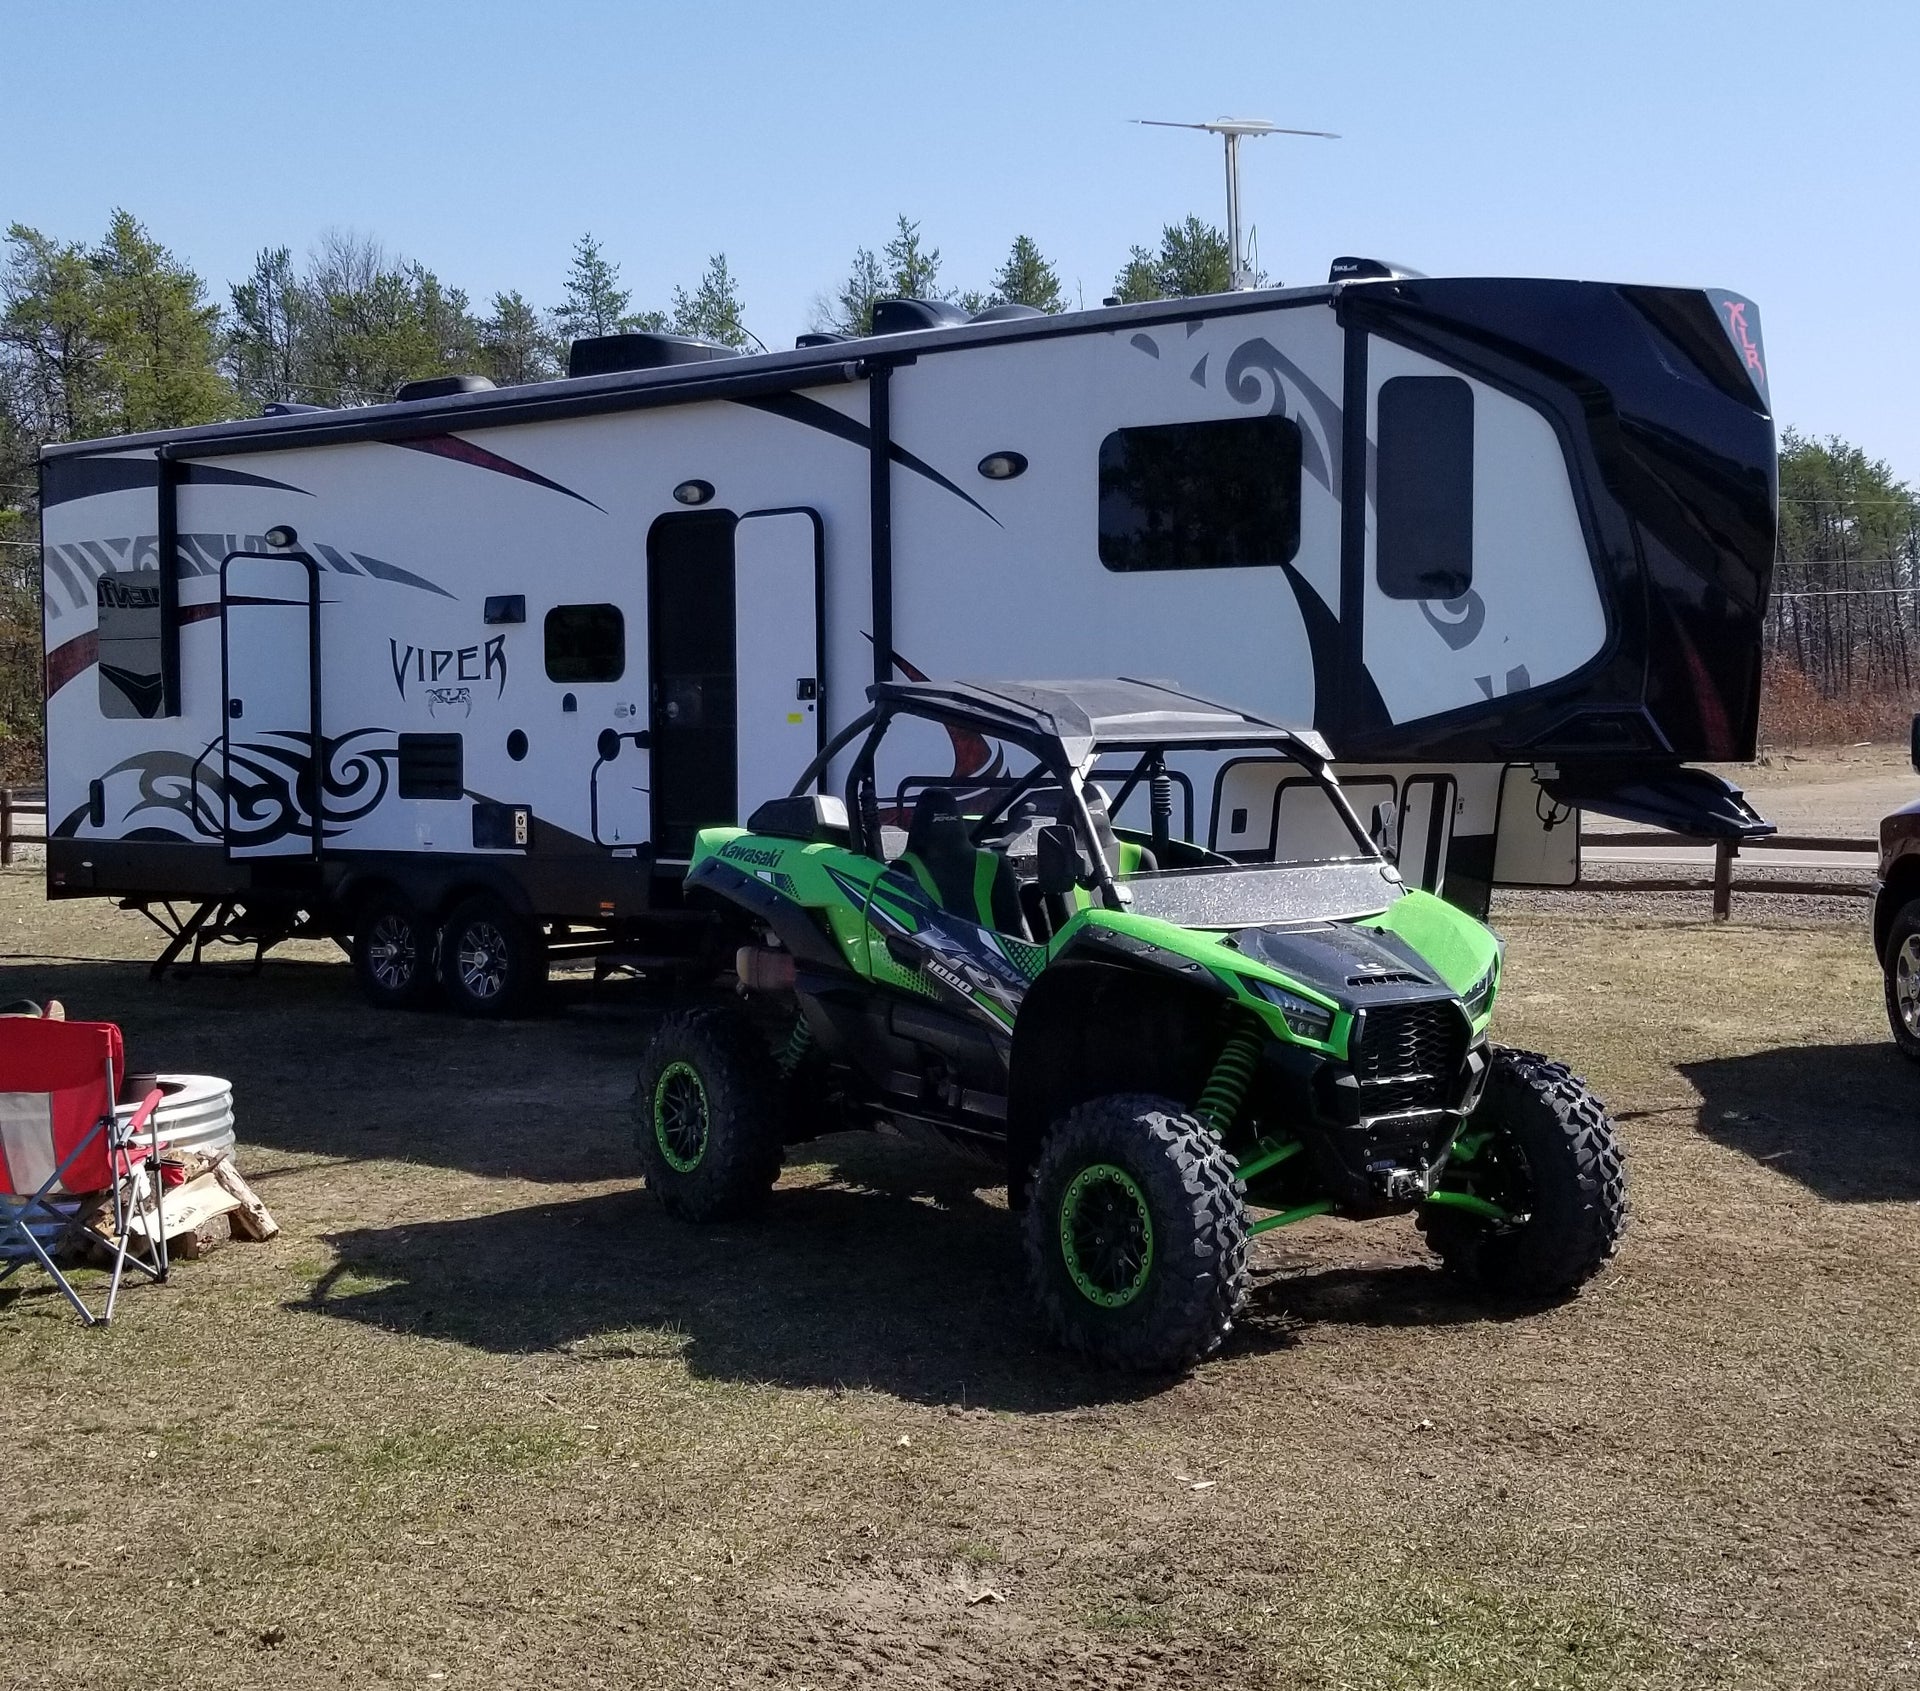 Is There A Toy Hauler Rv That My Krx